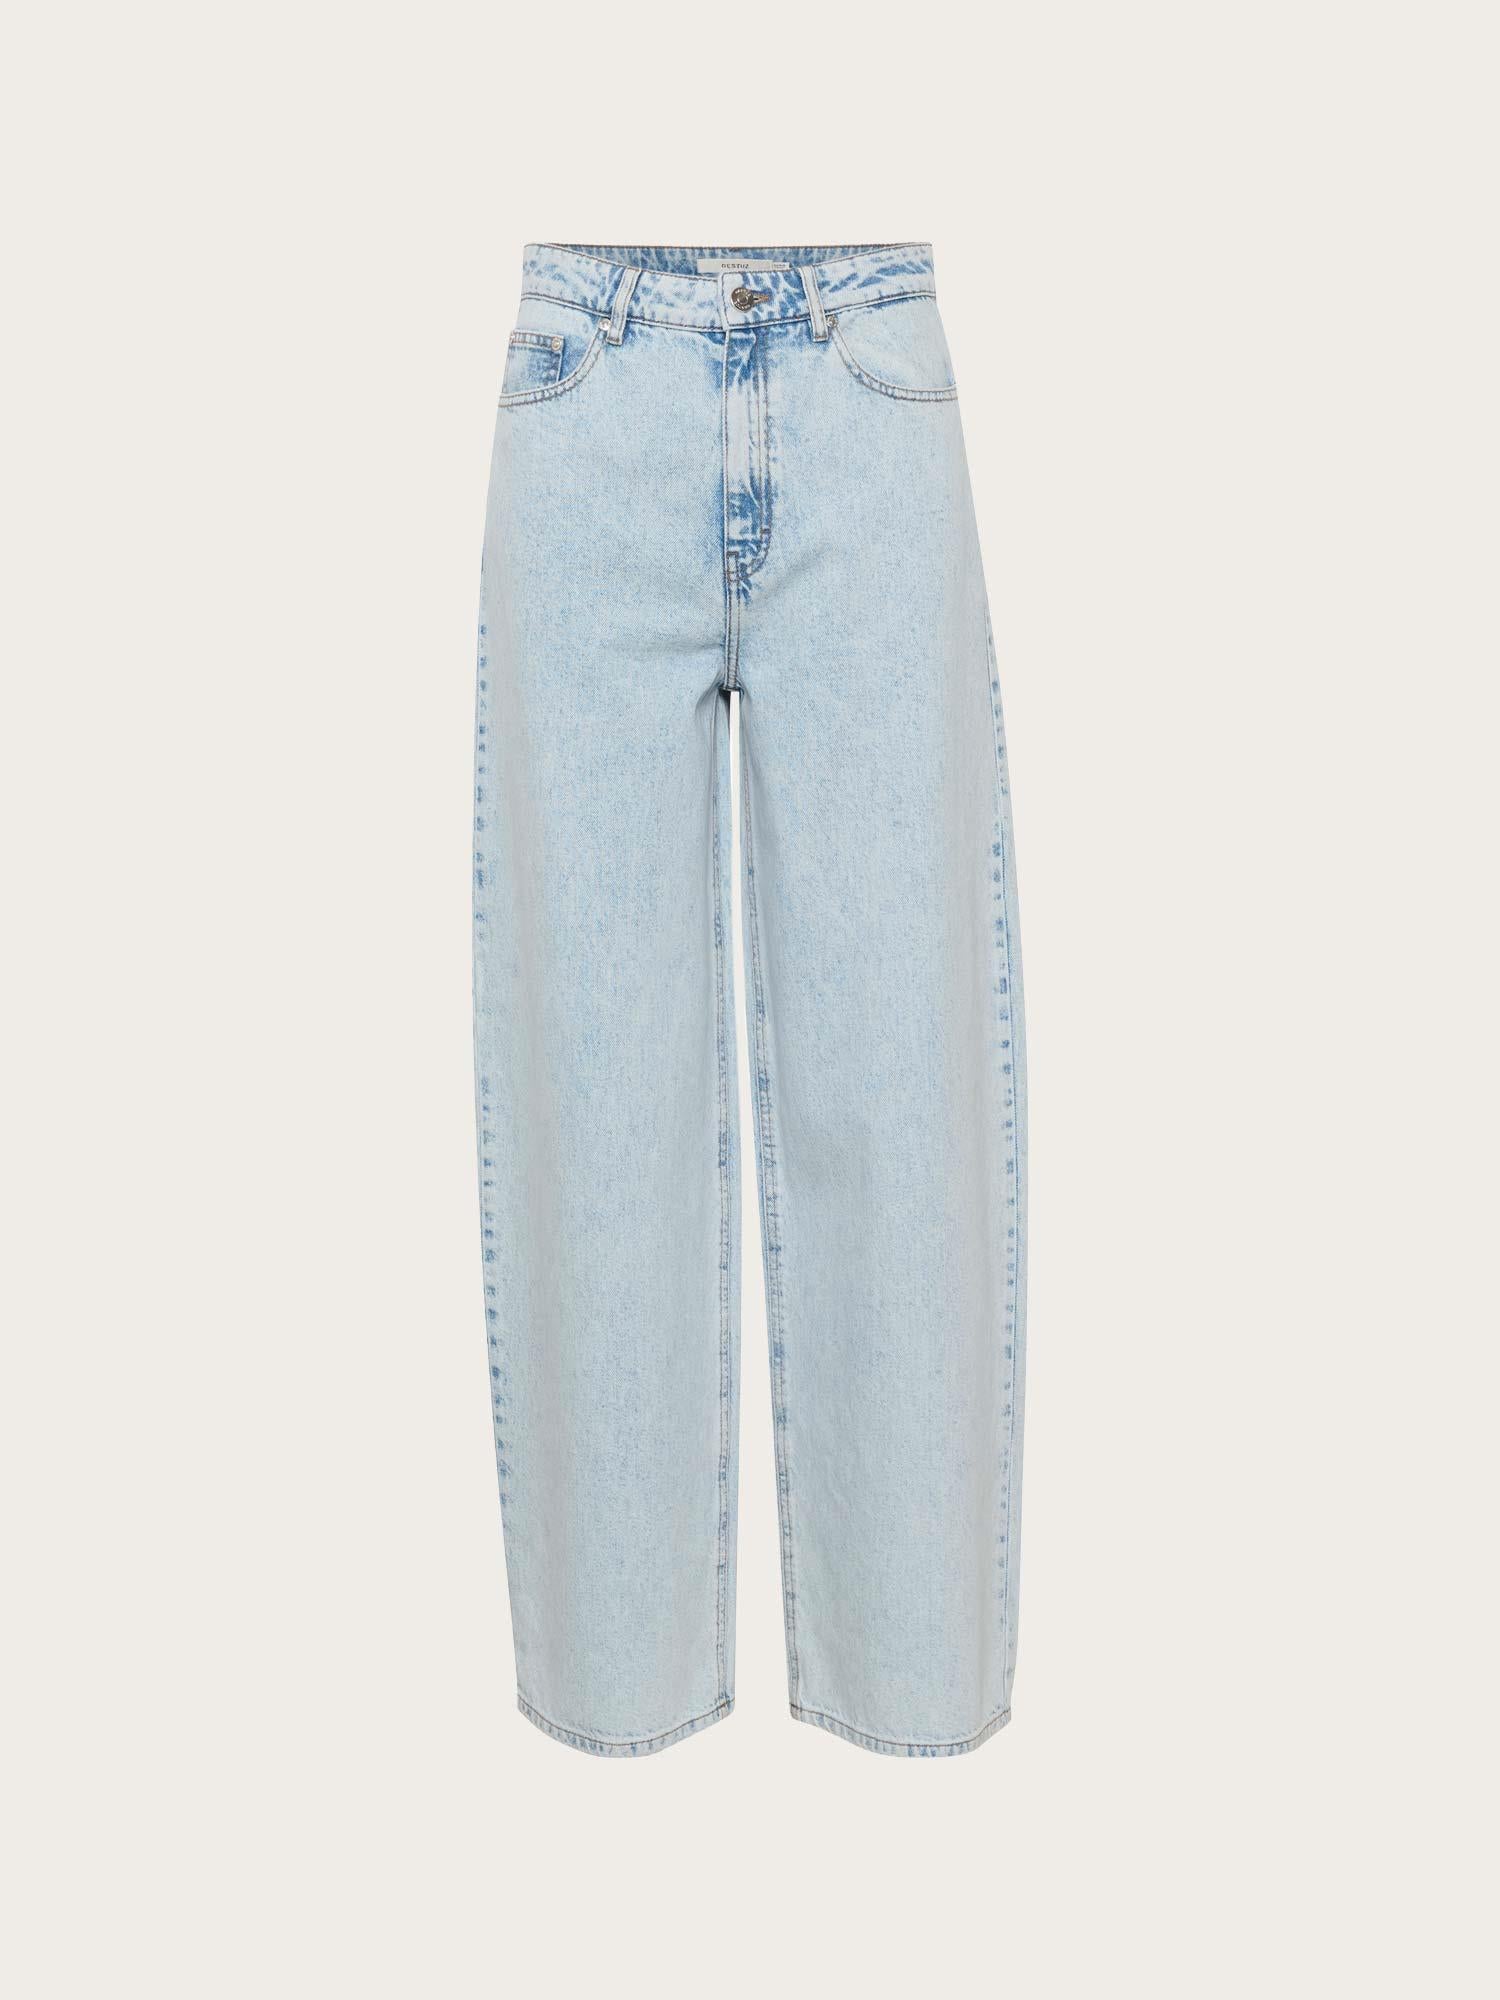 Kaily hw Wide Jeans - Light Blue Washed